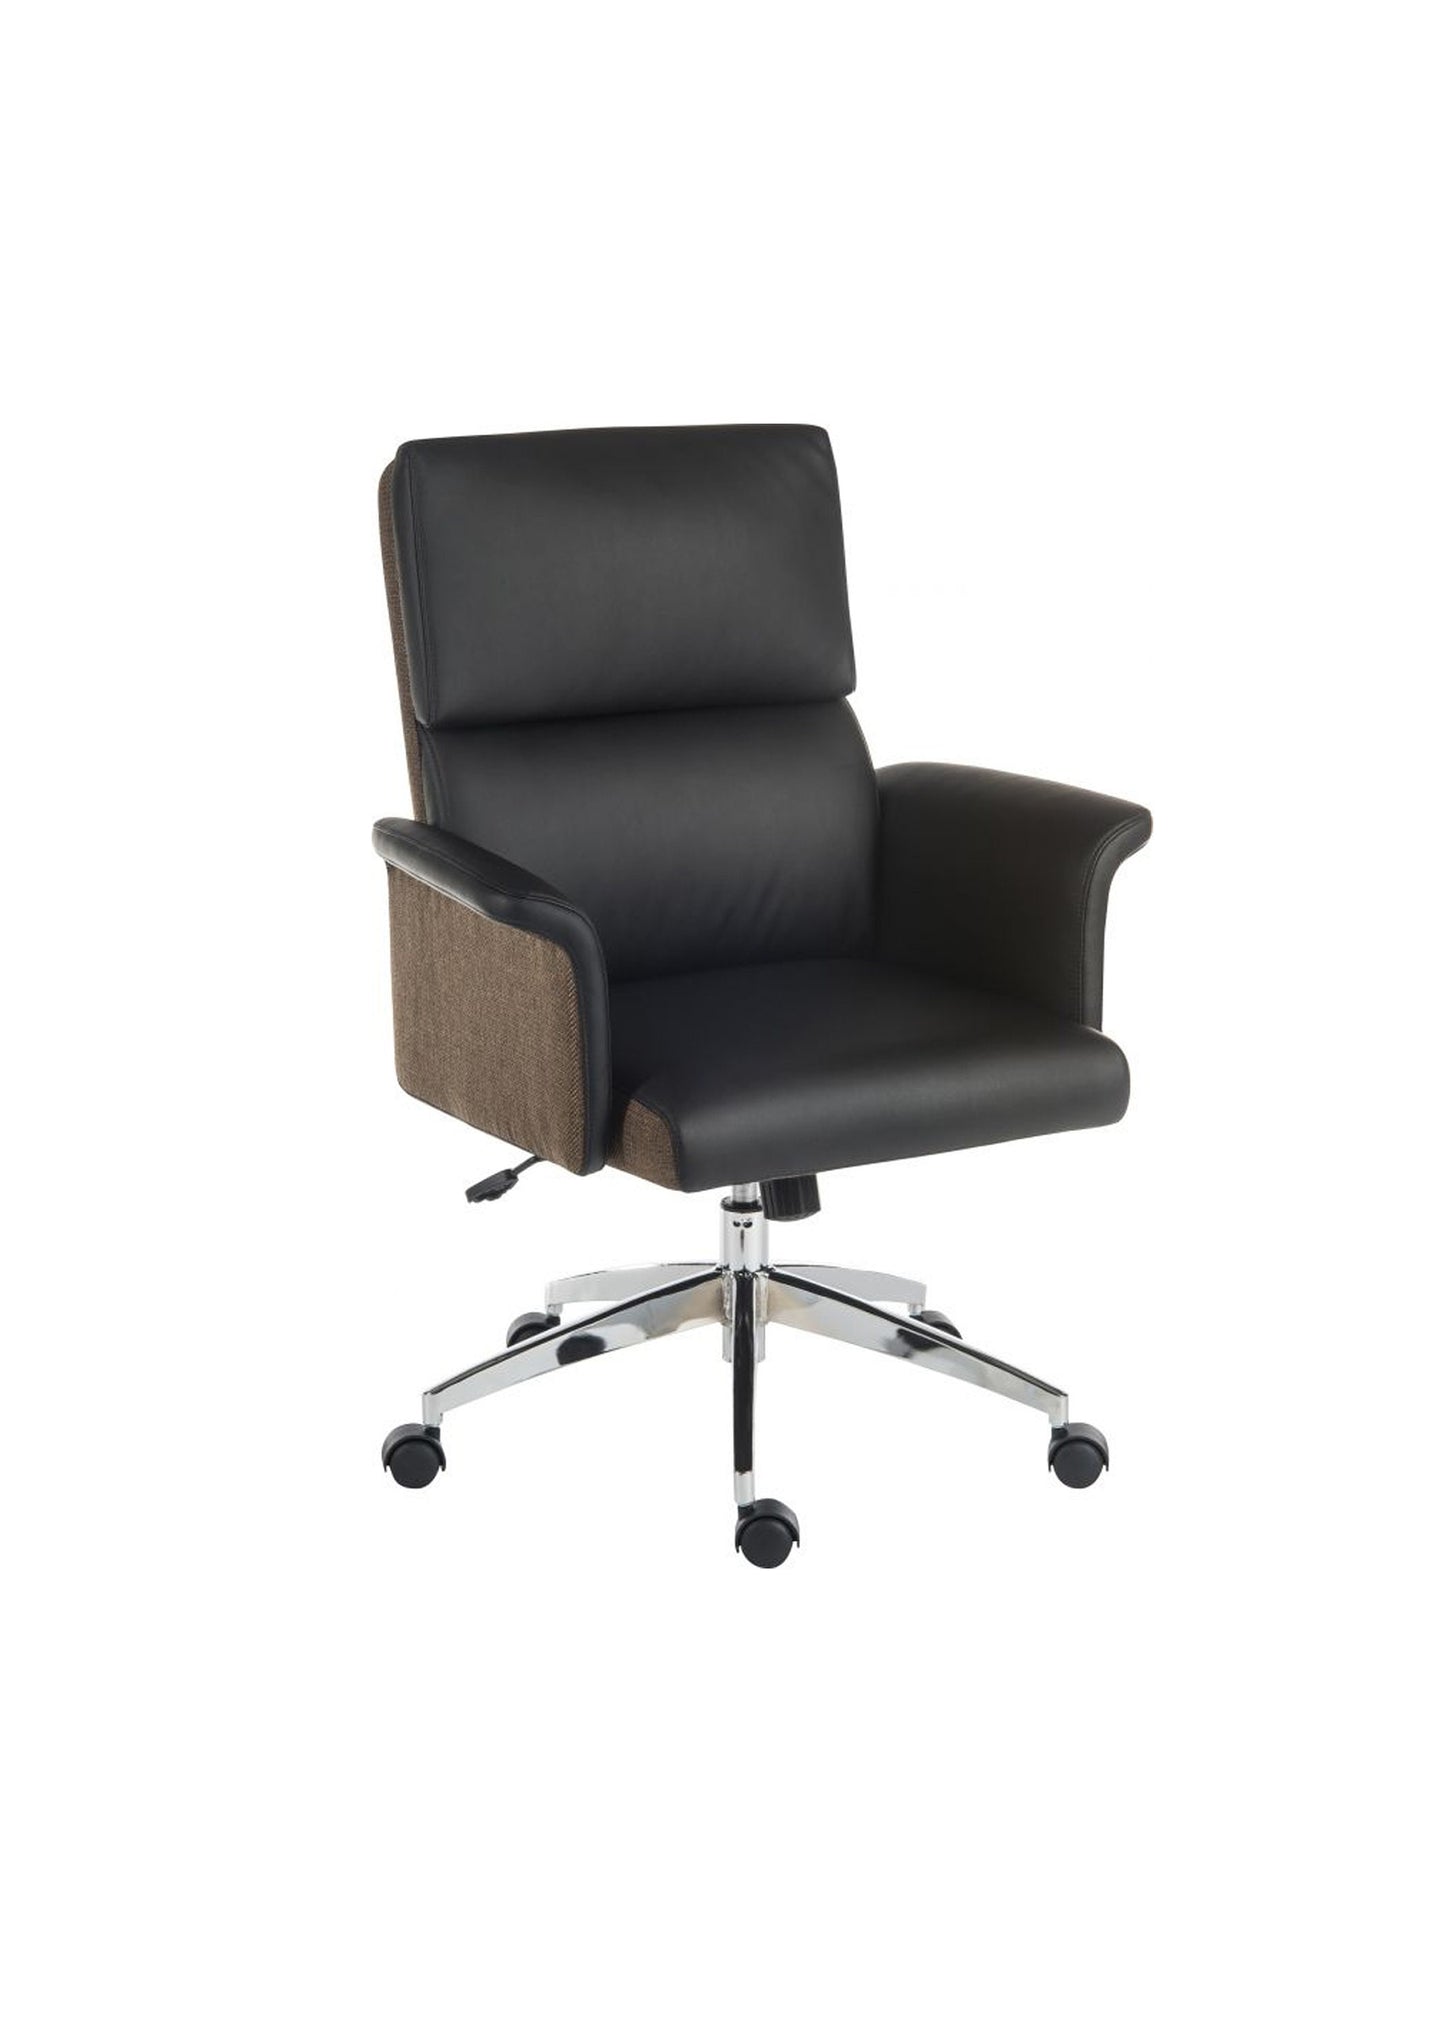 NEW Designer Medium Back Executive Mid Century Style adjustable swivel office/desk chair with silver base in faux leather - Black or Beige